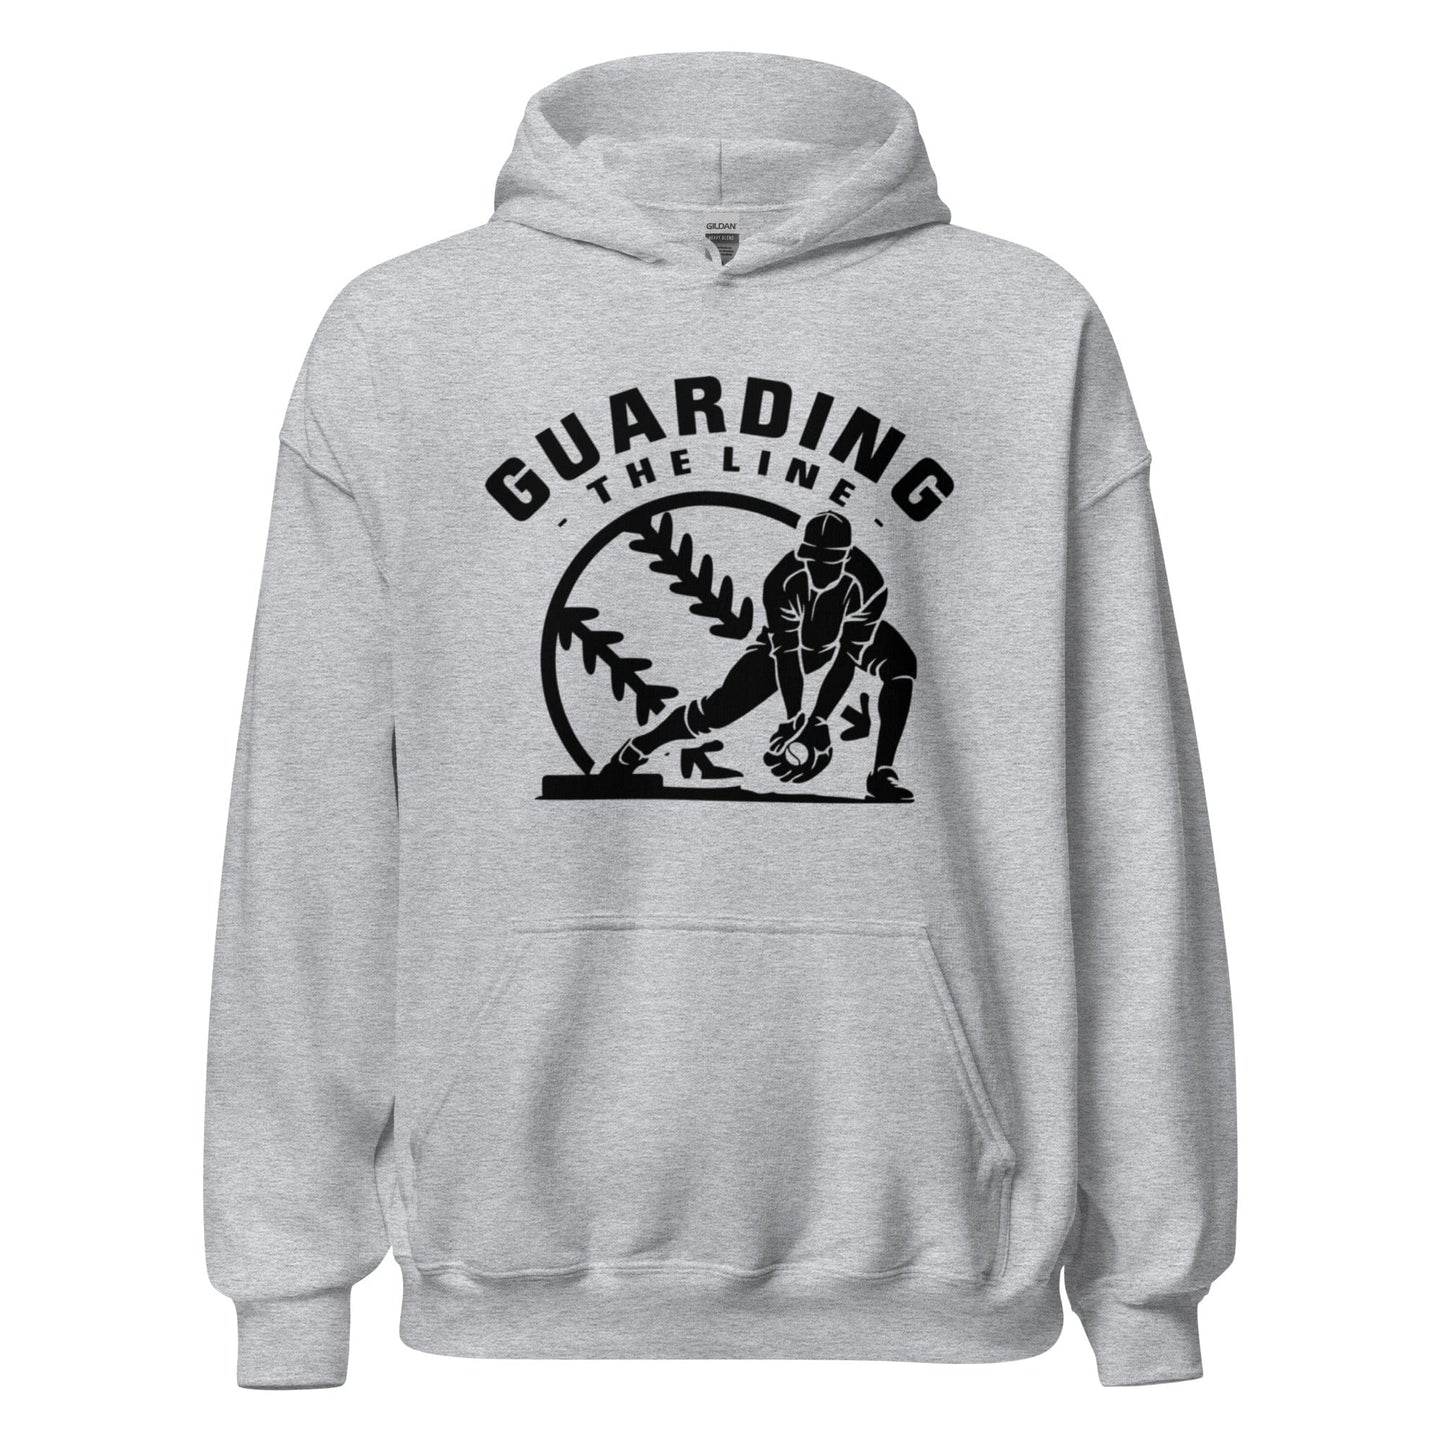 Guarding The Line - Adult Hoodie